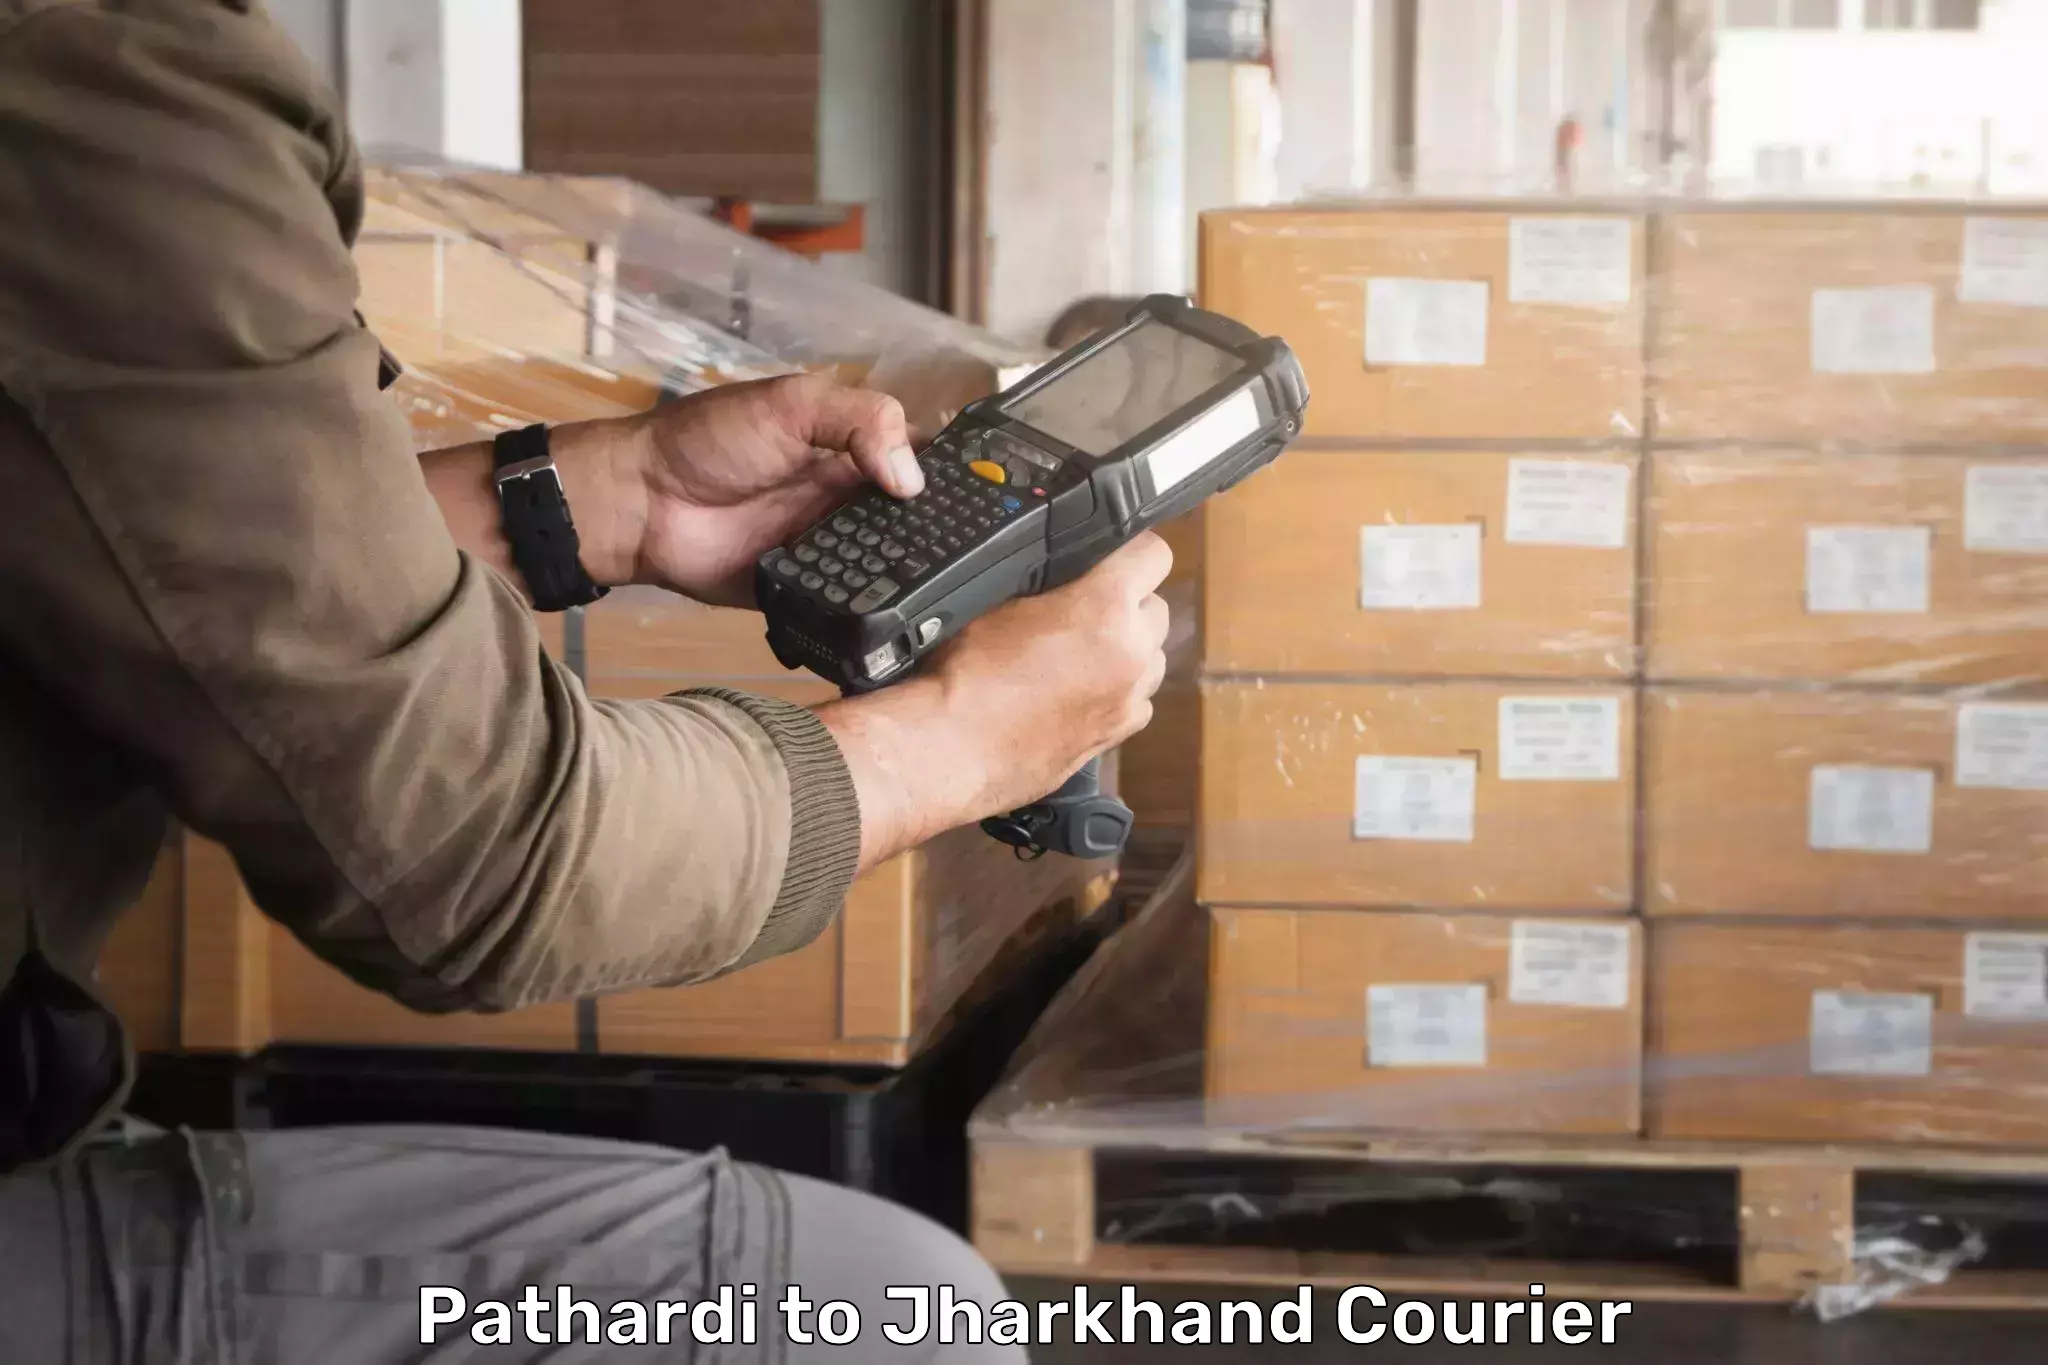 Courier service innovation Pathardi to Isri